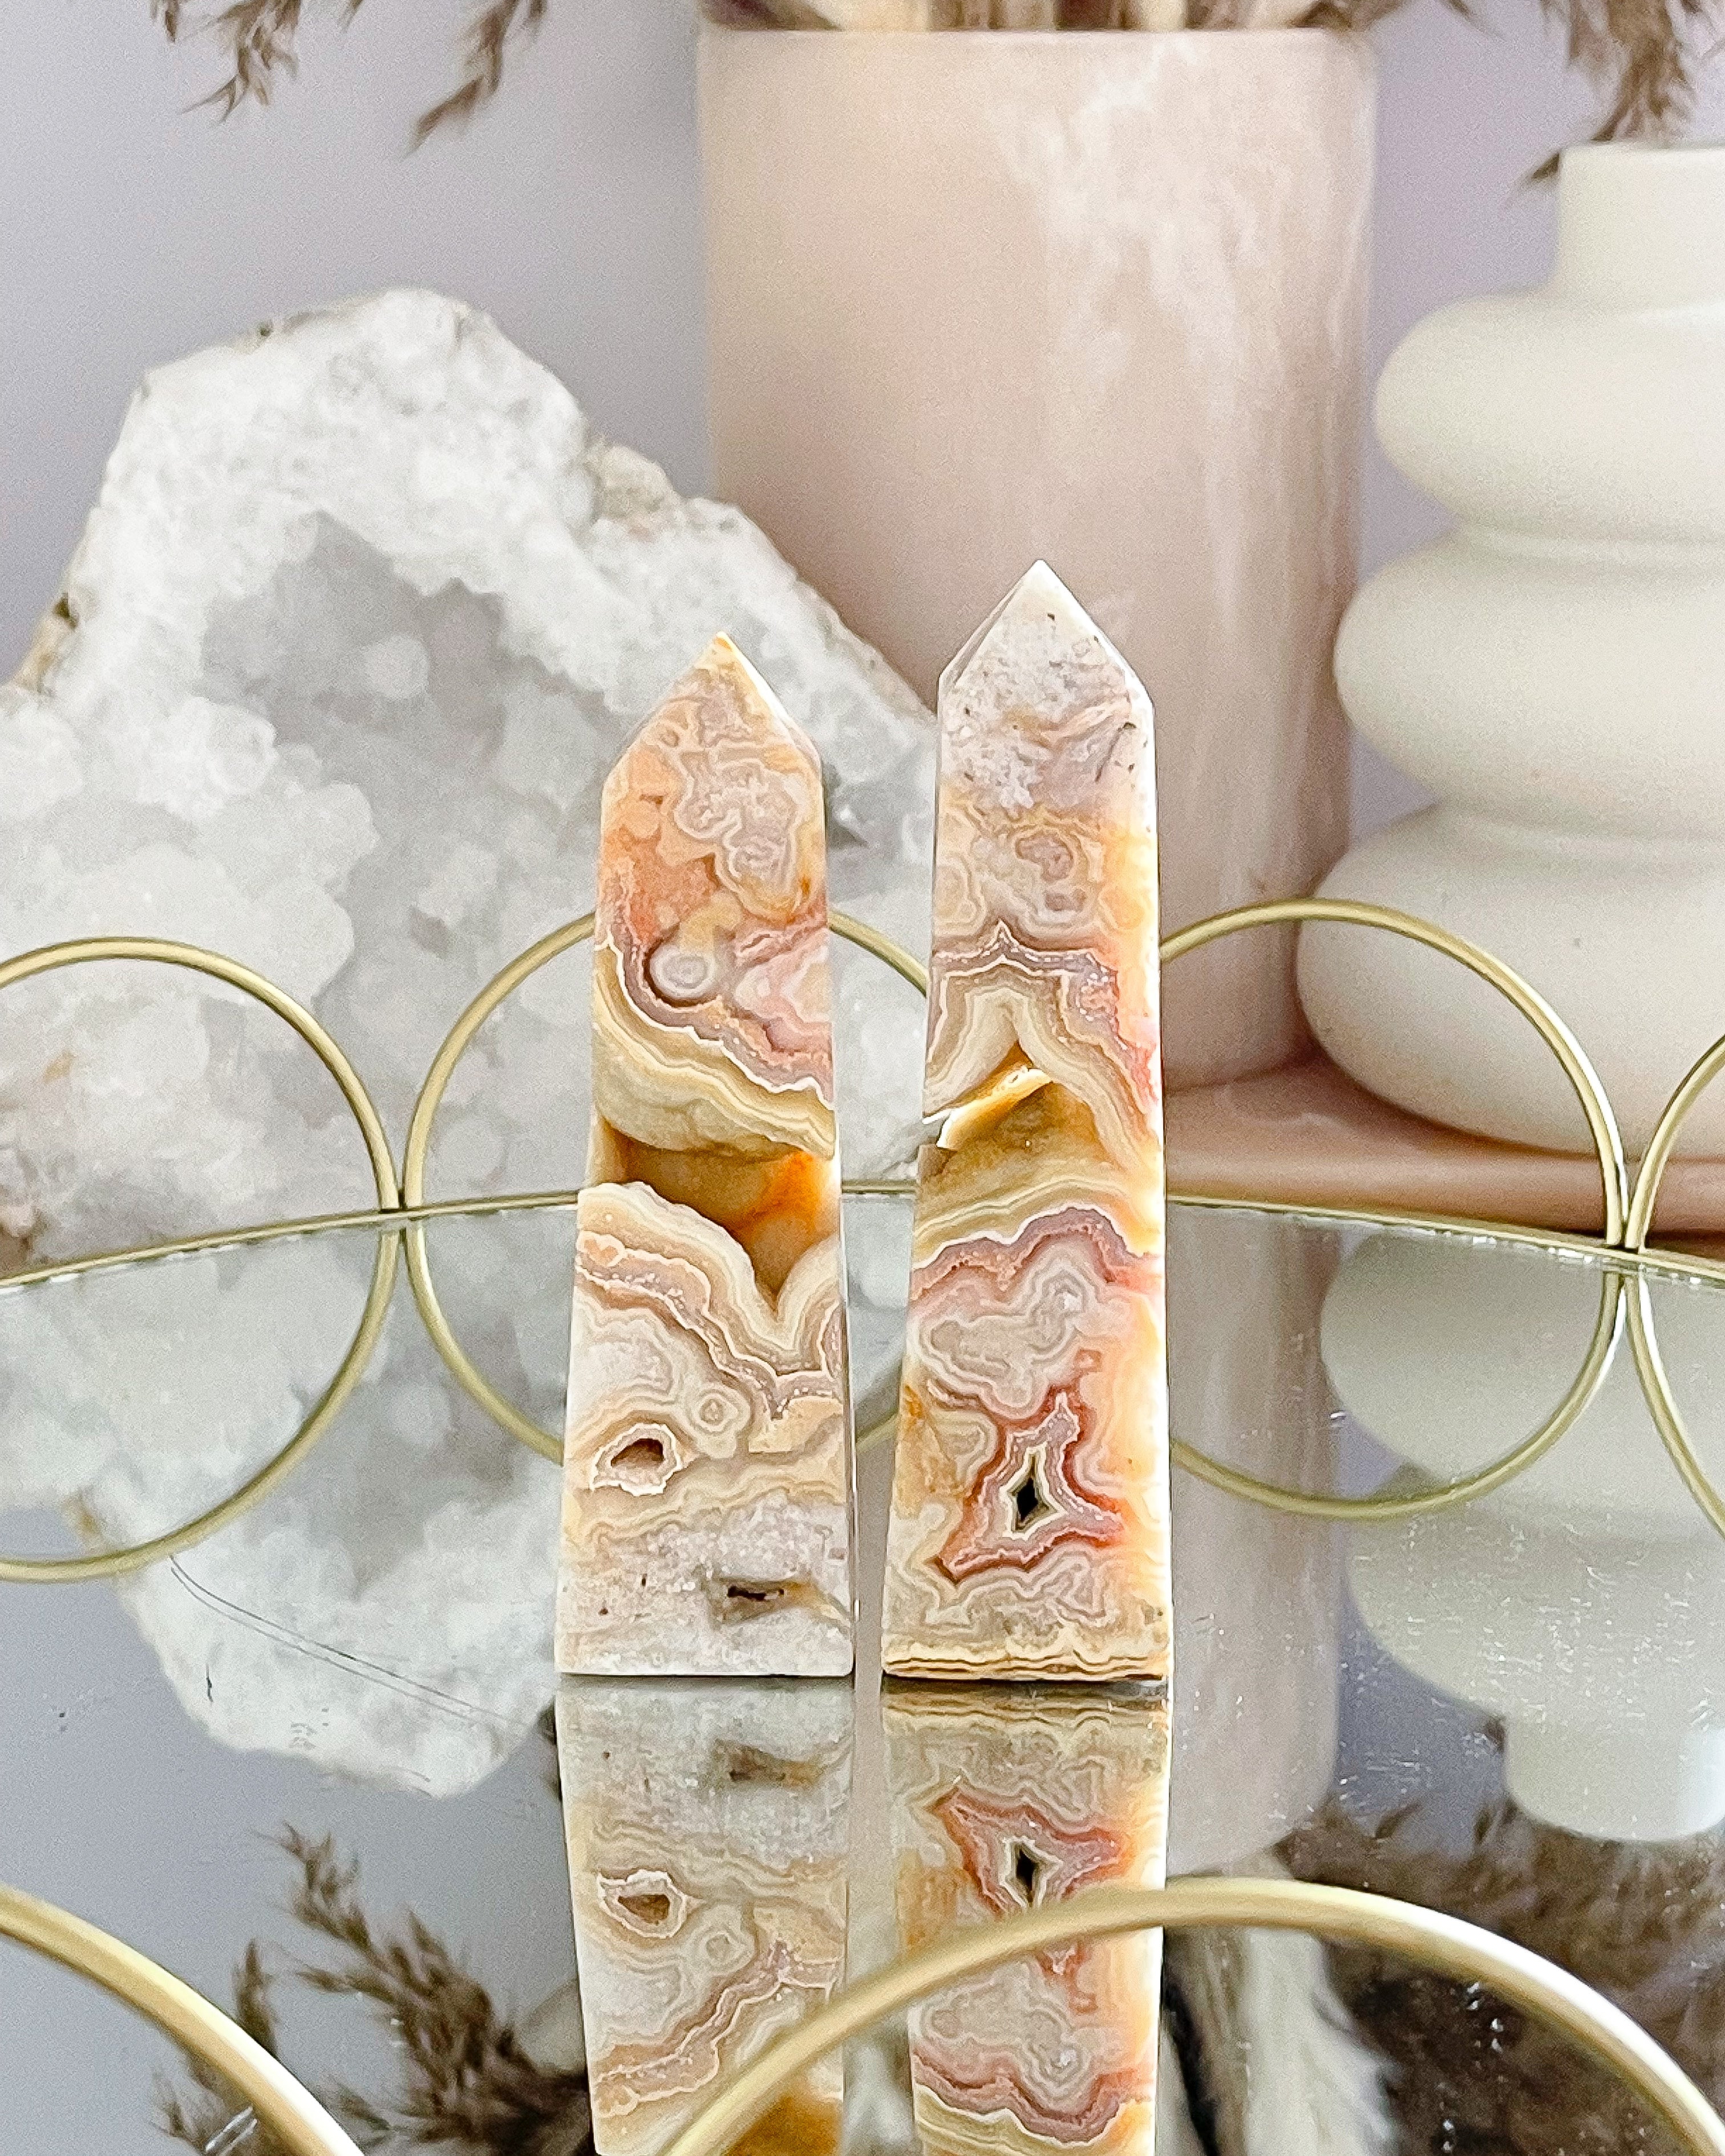 Yellow Crazy Lace Obelisk // Styling Set // Happiness + Balance + Positive Vibes